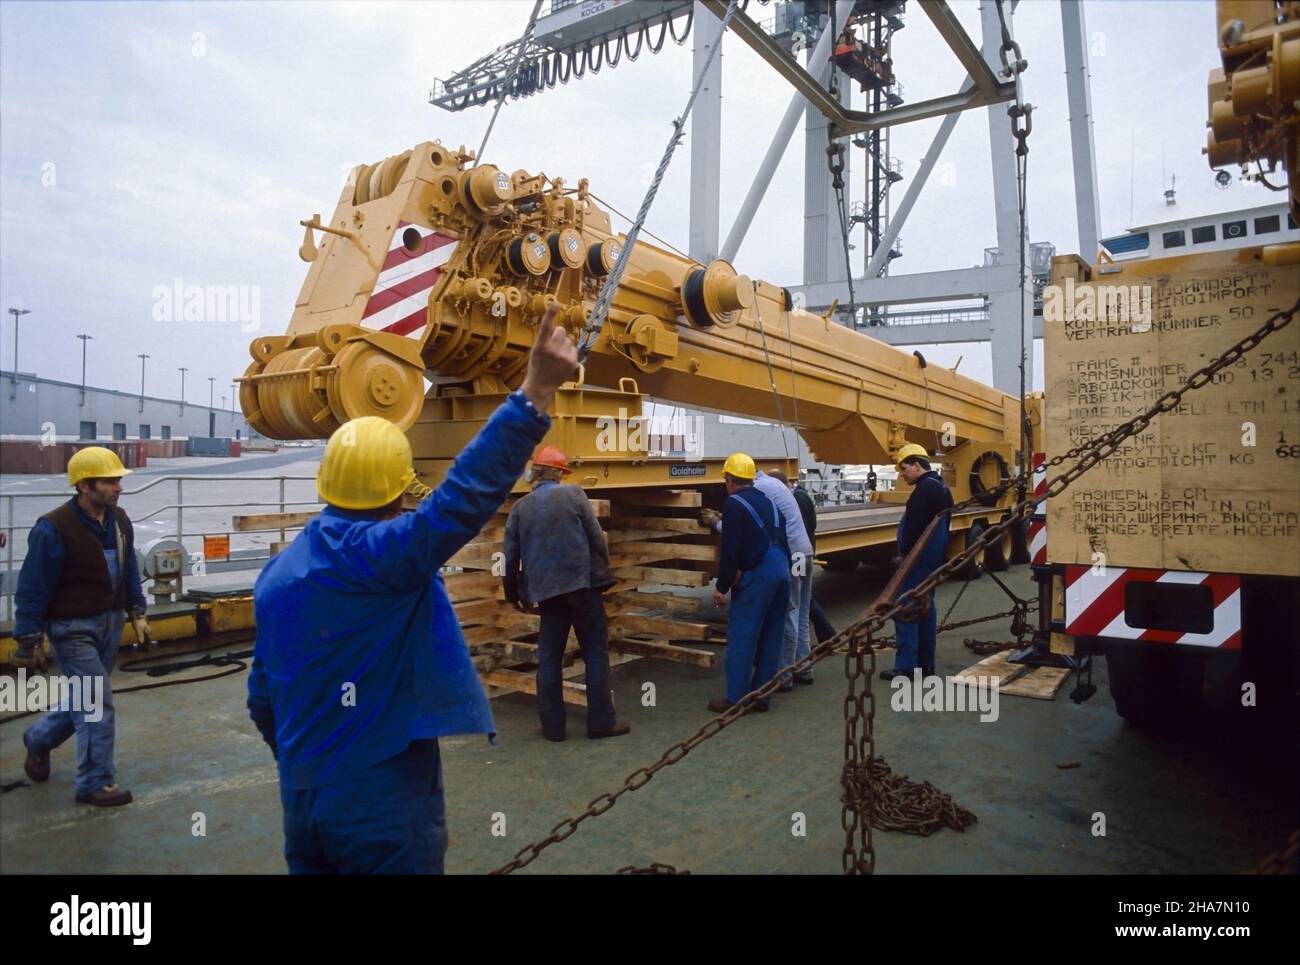 Heavy cargo, a mobile crane, being loaded onto the upper deck of a ro-ro vessel in the port of Hamburg, Germany. Stock Photo